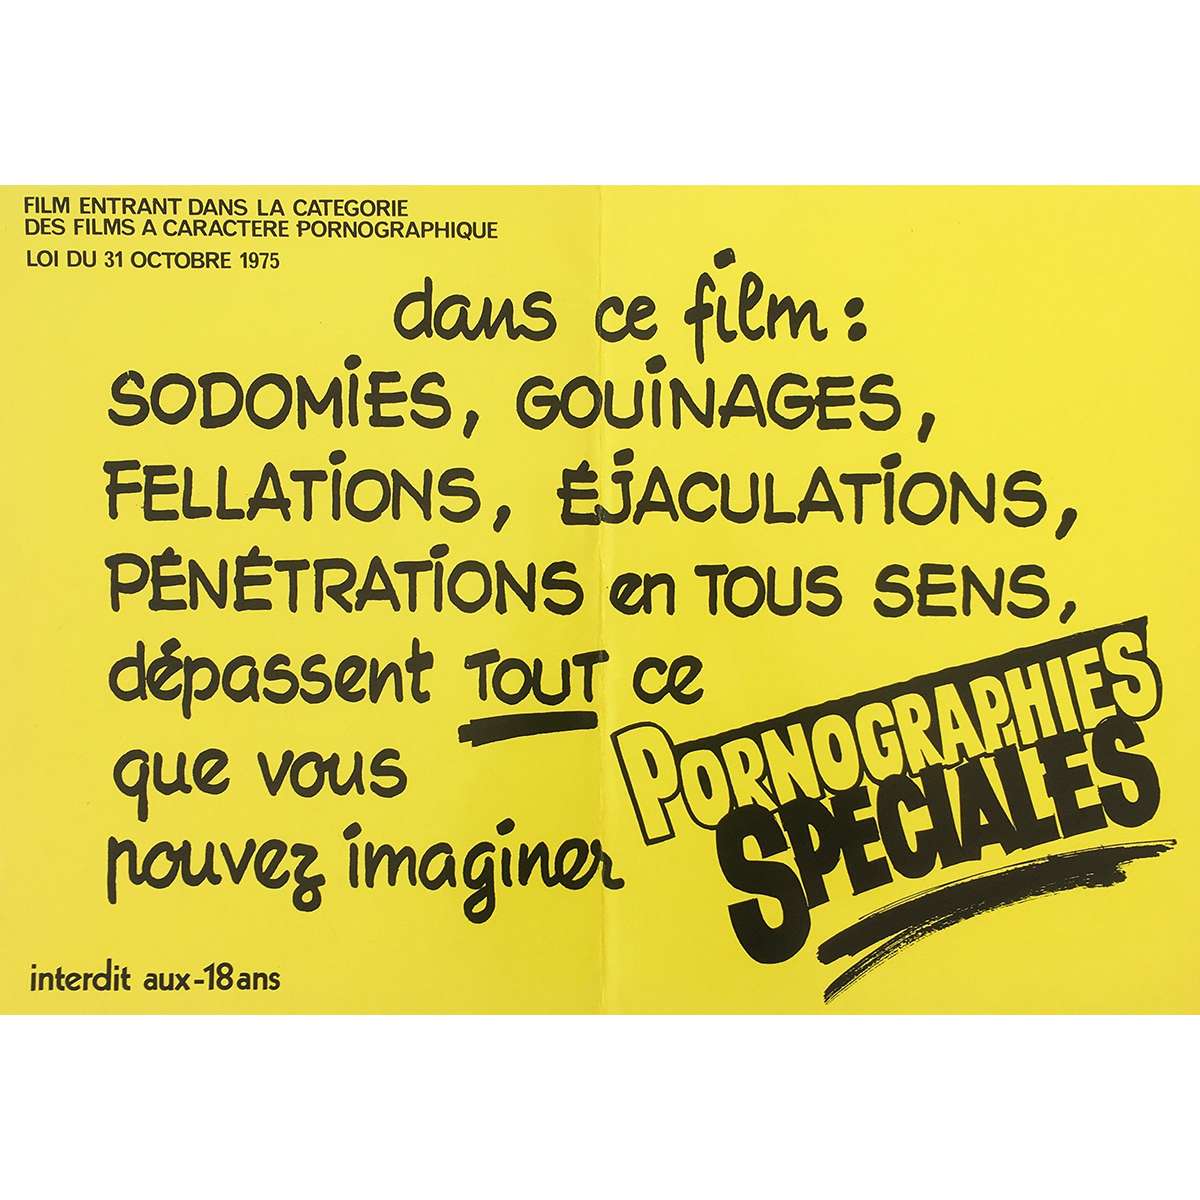 PORNOGRAPHIES SPECIALES French Movie Poster - 12x15 in. - 1970'S Jaune